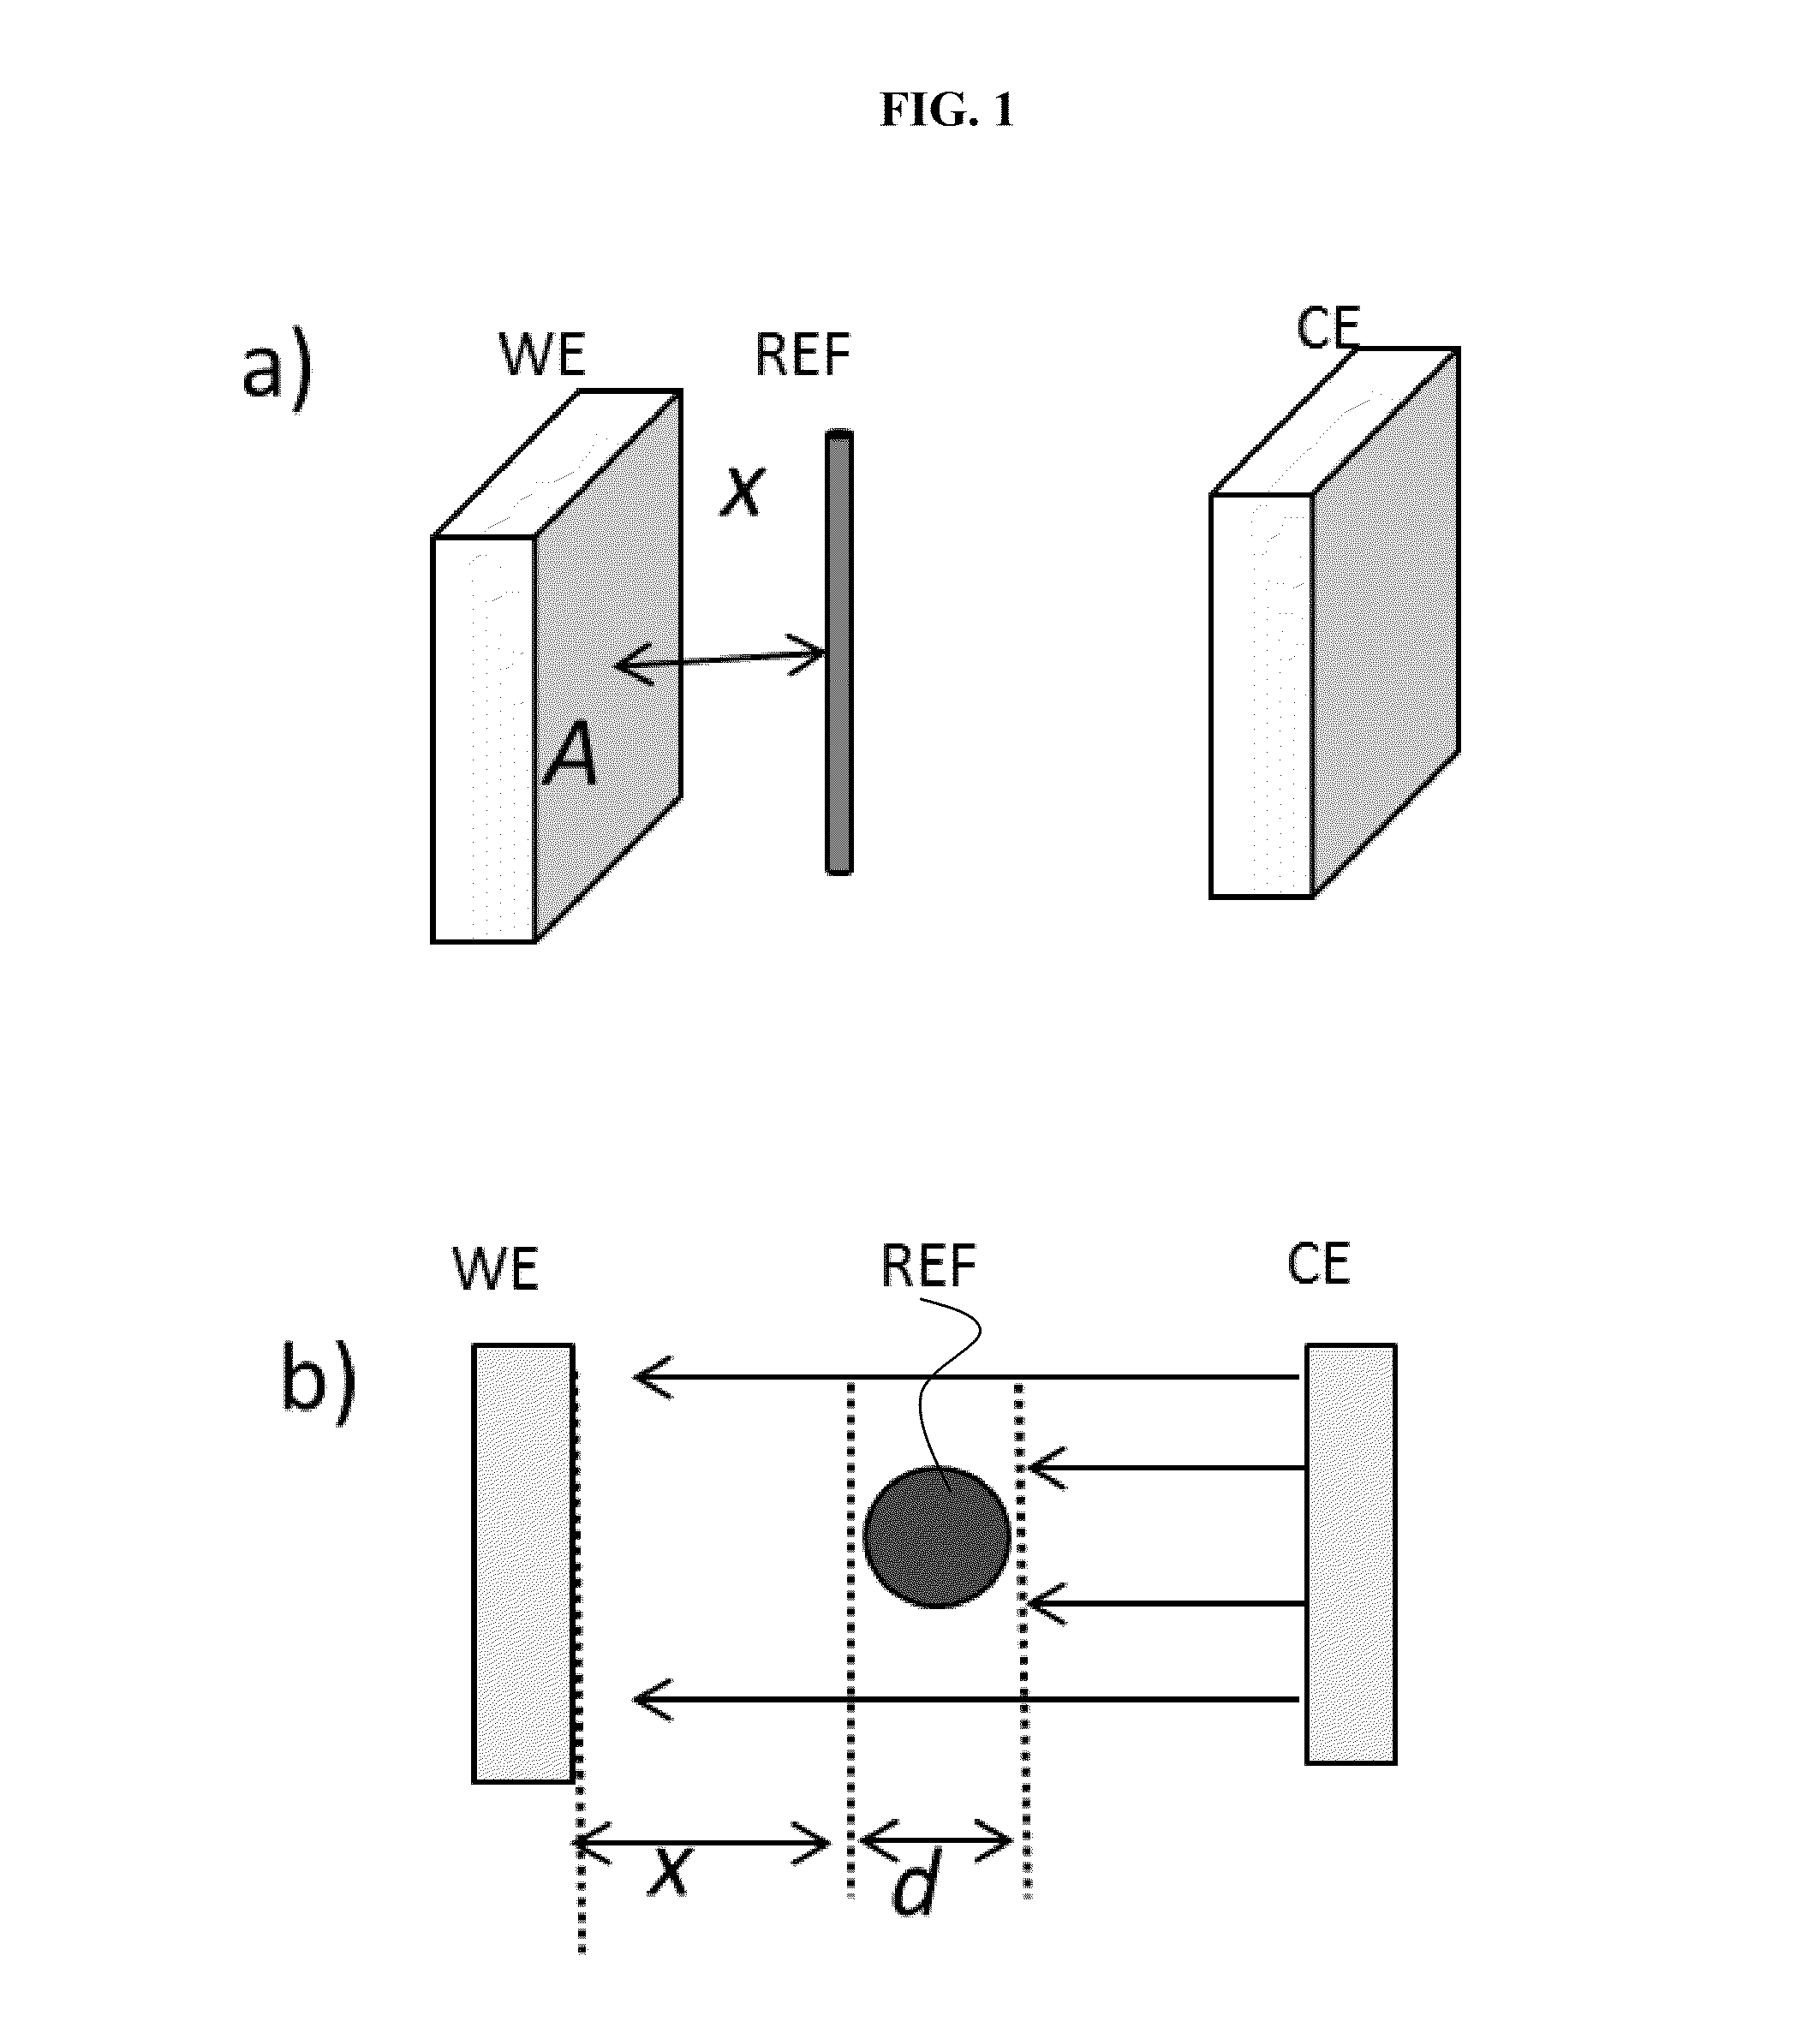 Battery with reference electrode for voltage monitoring